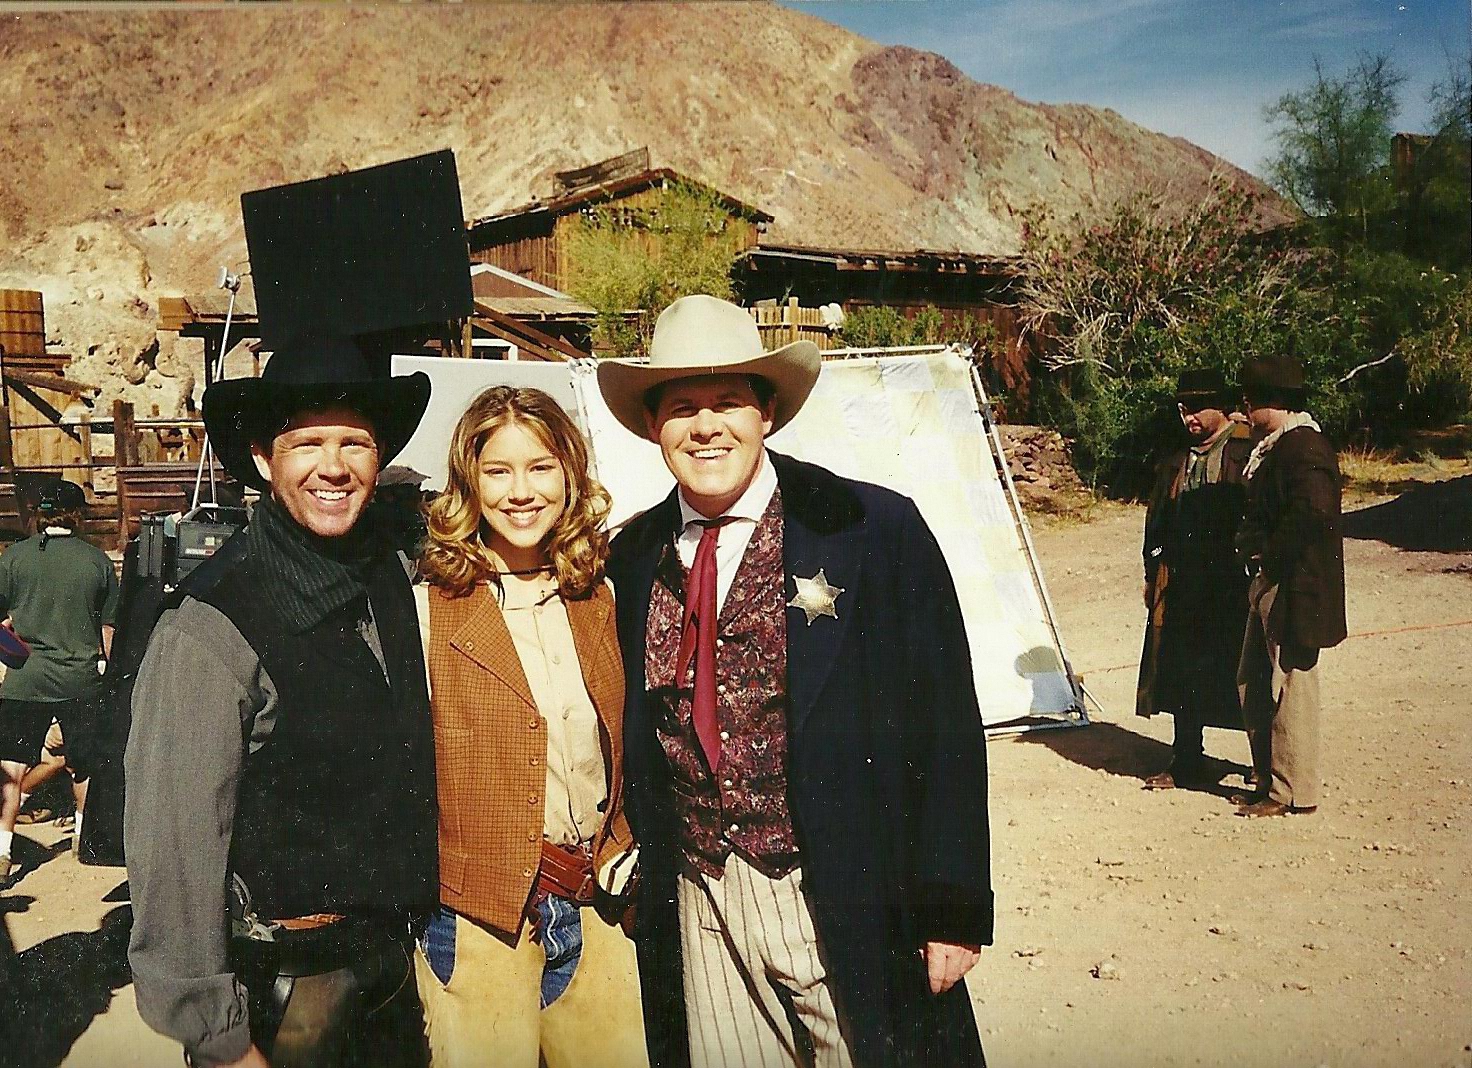 On location in Calico.